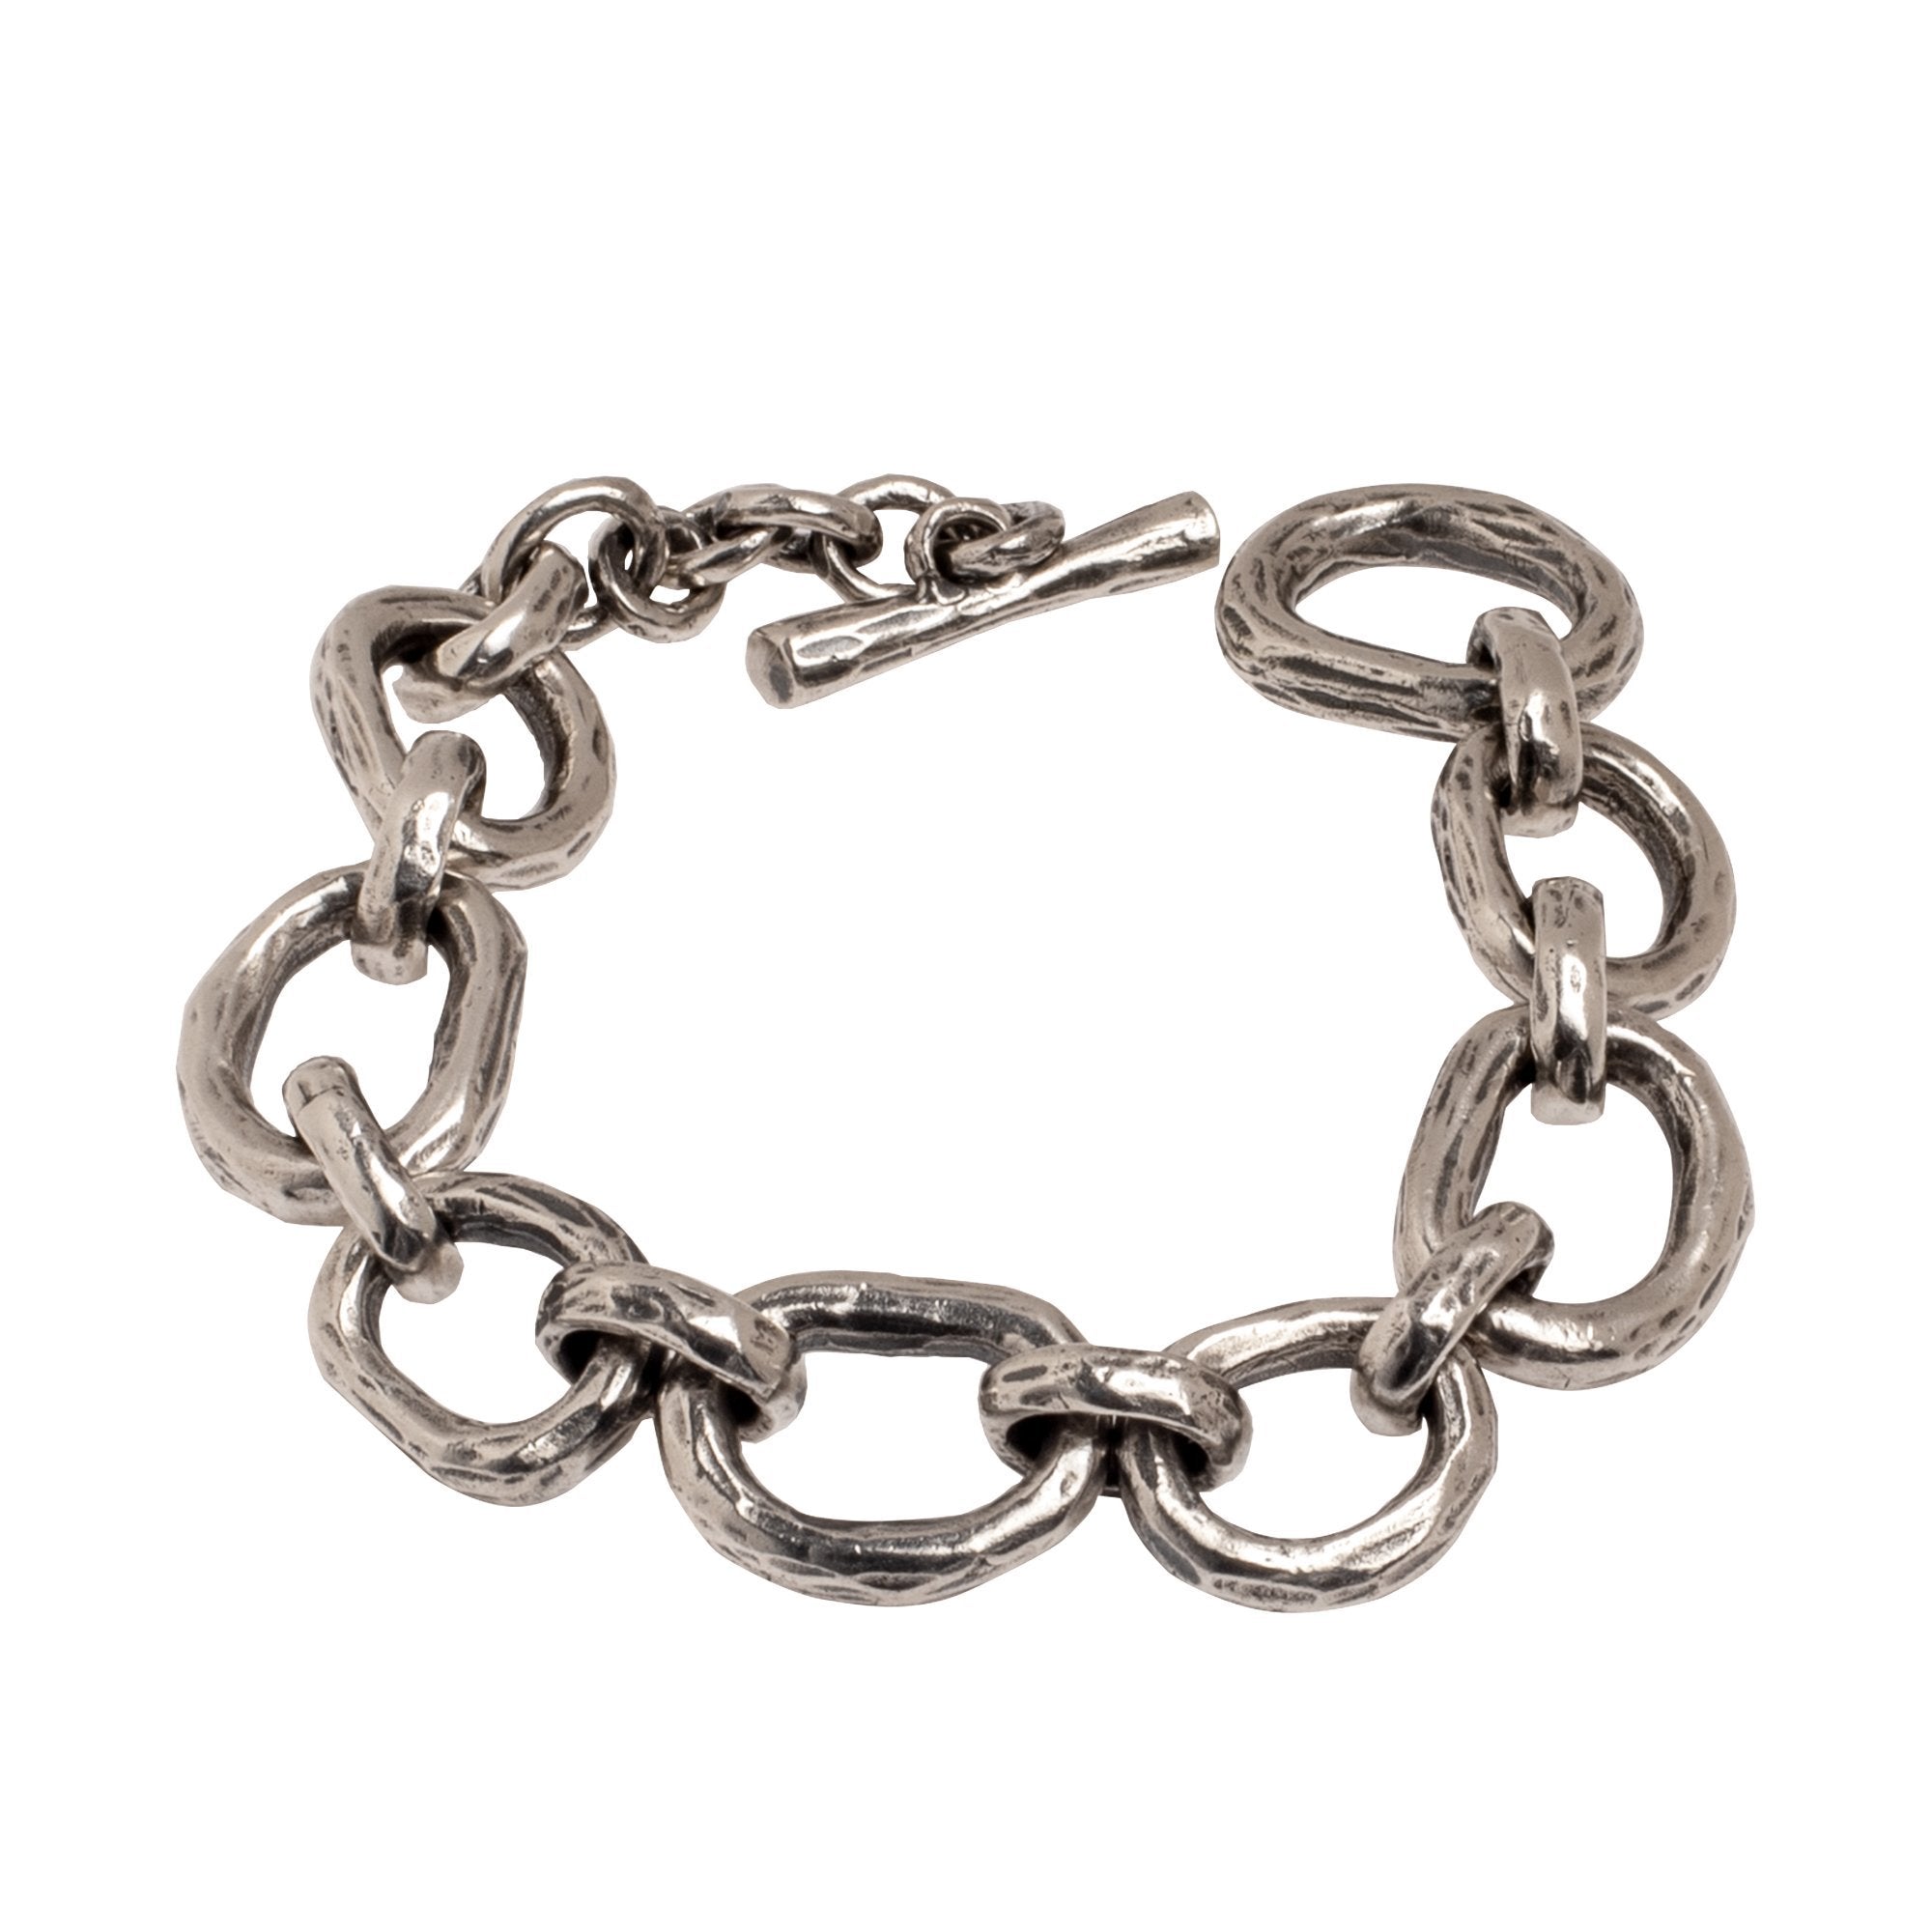 Classic Snake Chain Charm Bracelet Sterling Silver | Loulu Charms 7.48 inch (19 cm)